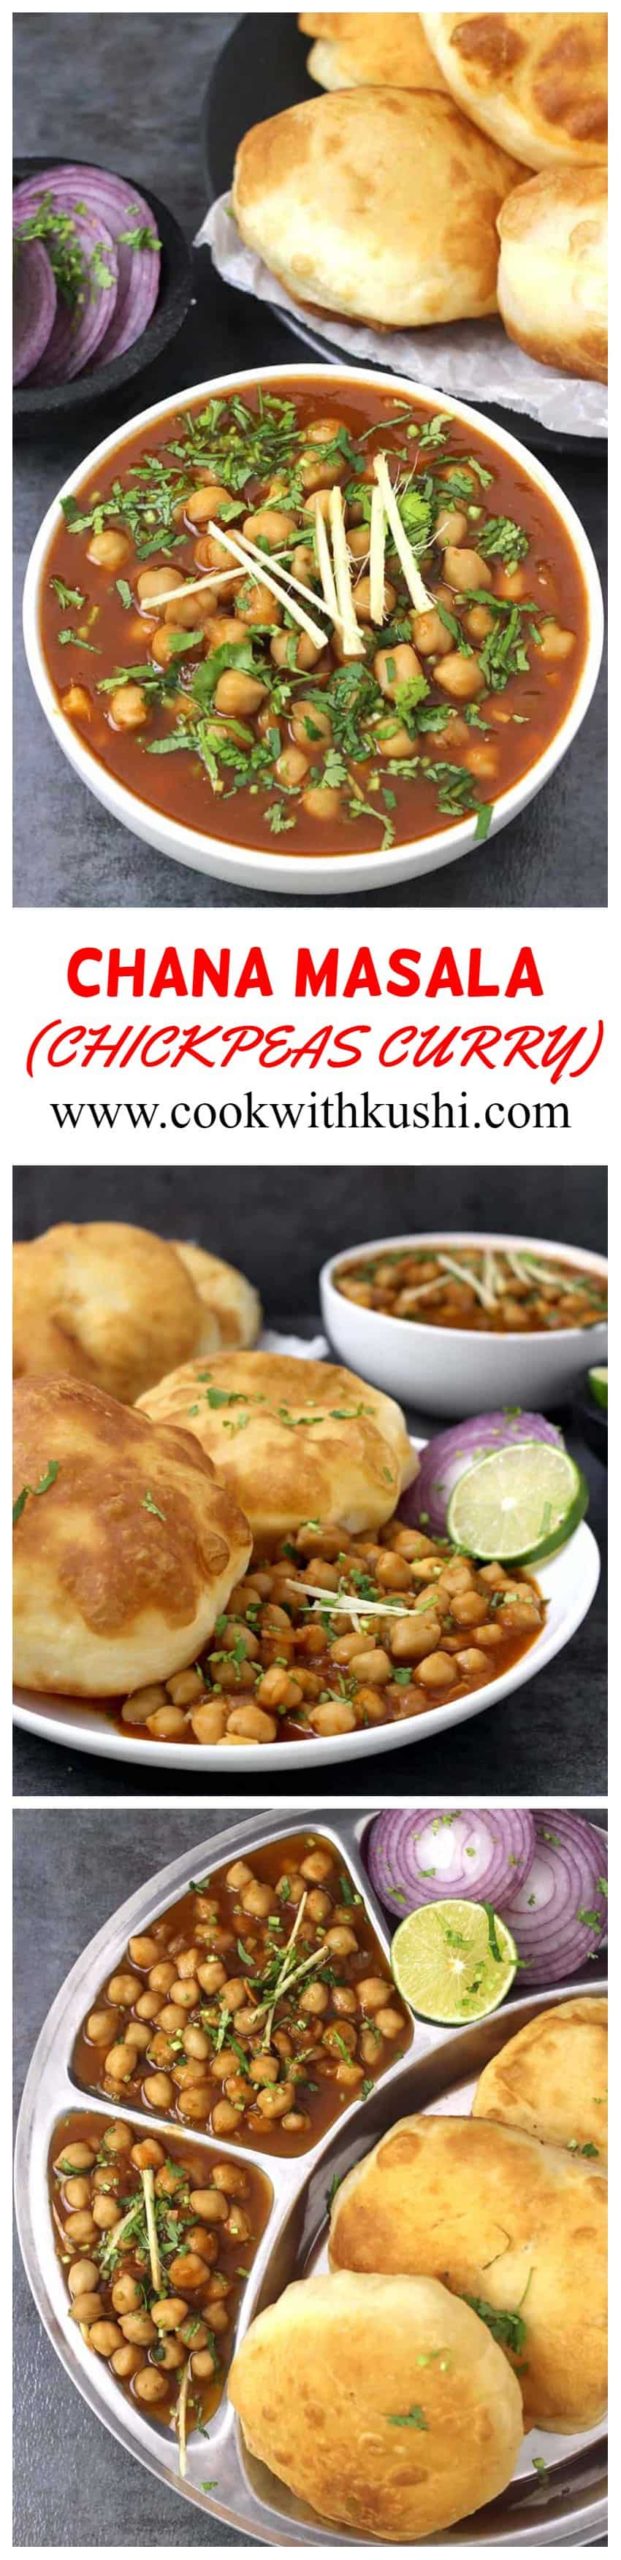 Chana Masala or Chickpeas Curry or Chole is a vegan and gluten free, flavorful and delicious Indian dish where the chickpeas (channa) is cooked in aromatic onion tomato masala gravy.  #chickpeascurry #chanamasala #cholerecipe #punjabichole #amritsarichole #veganchanamasala #channamasala #instantpot #easymeals #lunchideas #dinnerideas #breakfastideas